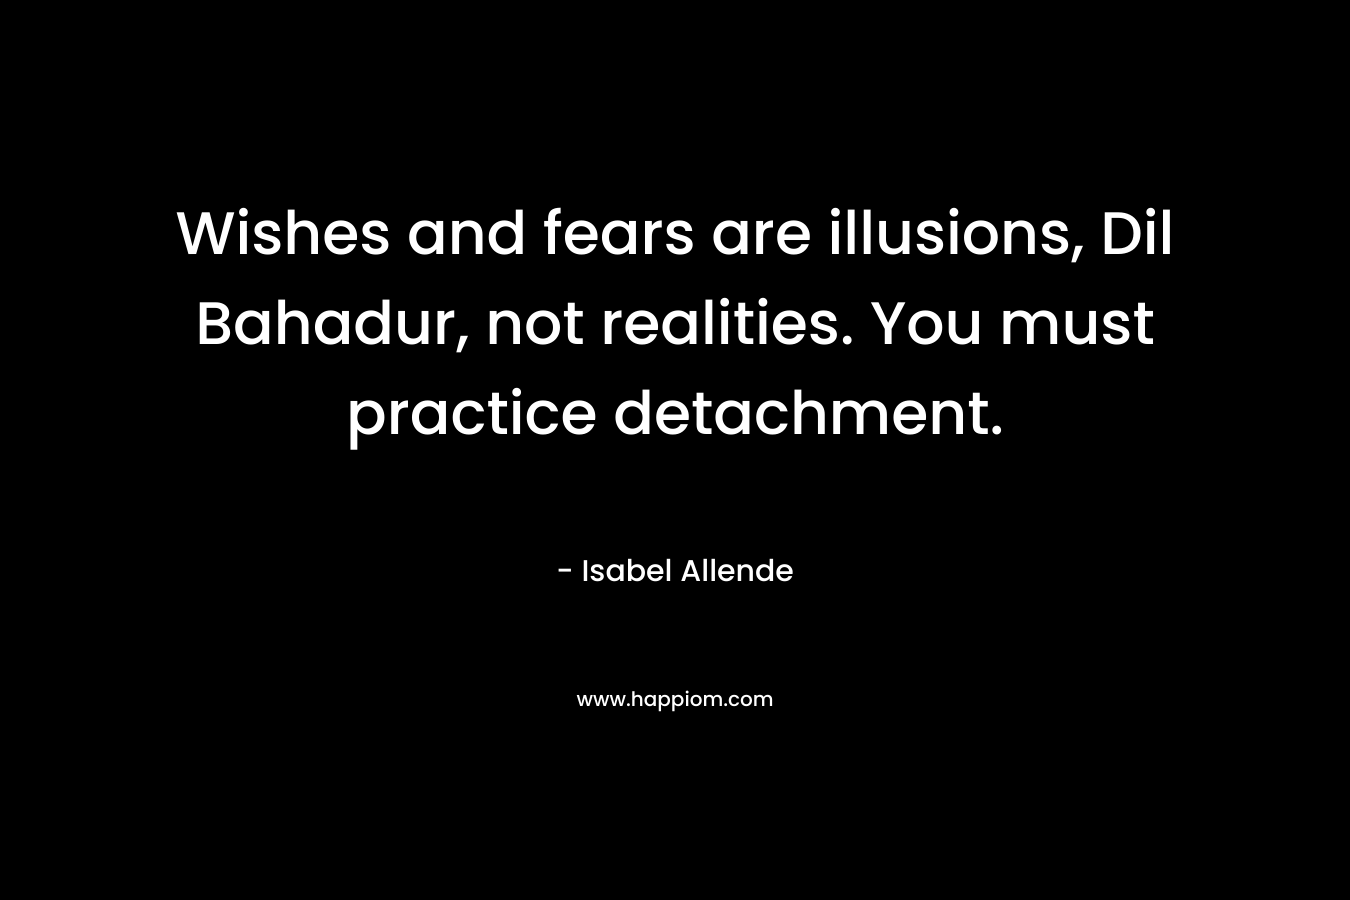 Wishes and fears are illusions, Dil Bahadur, not realities. You must practice detachment. – Isabel Allende